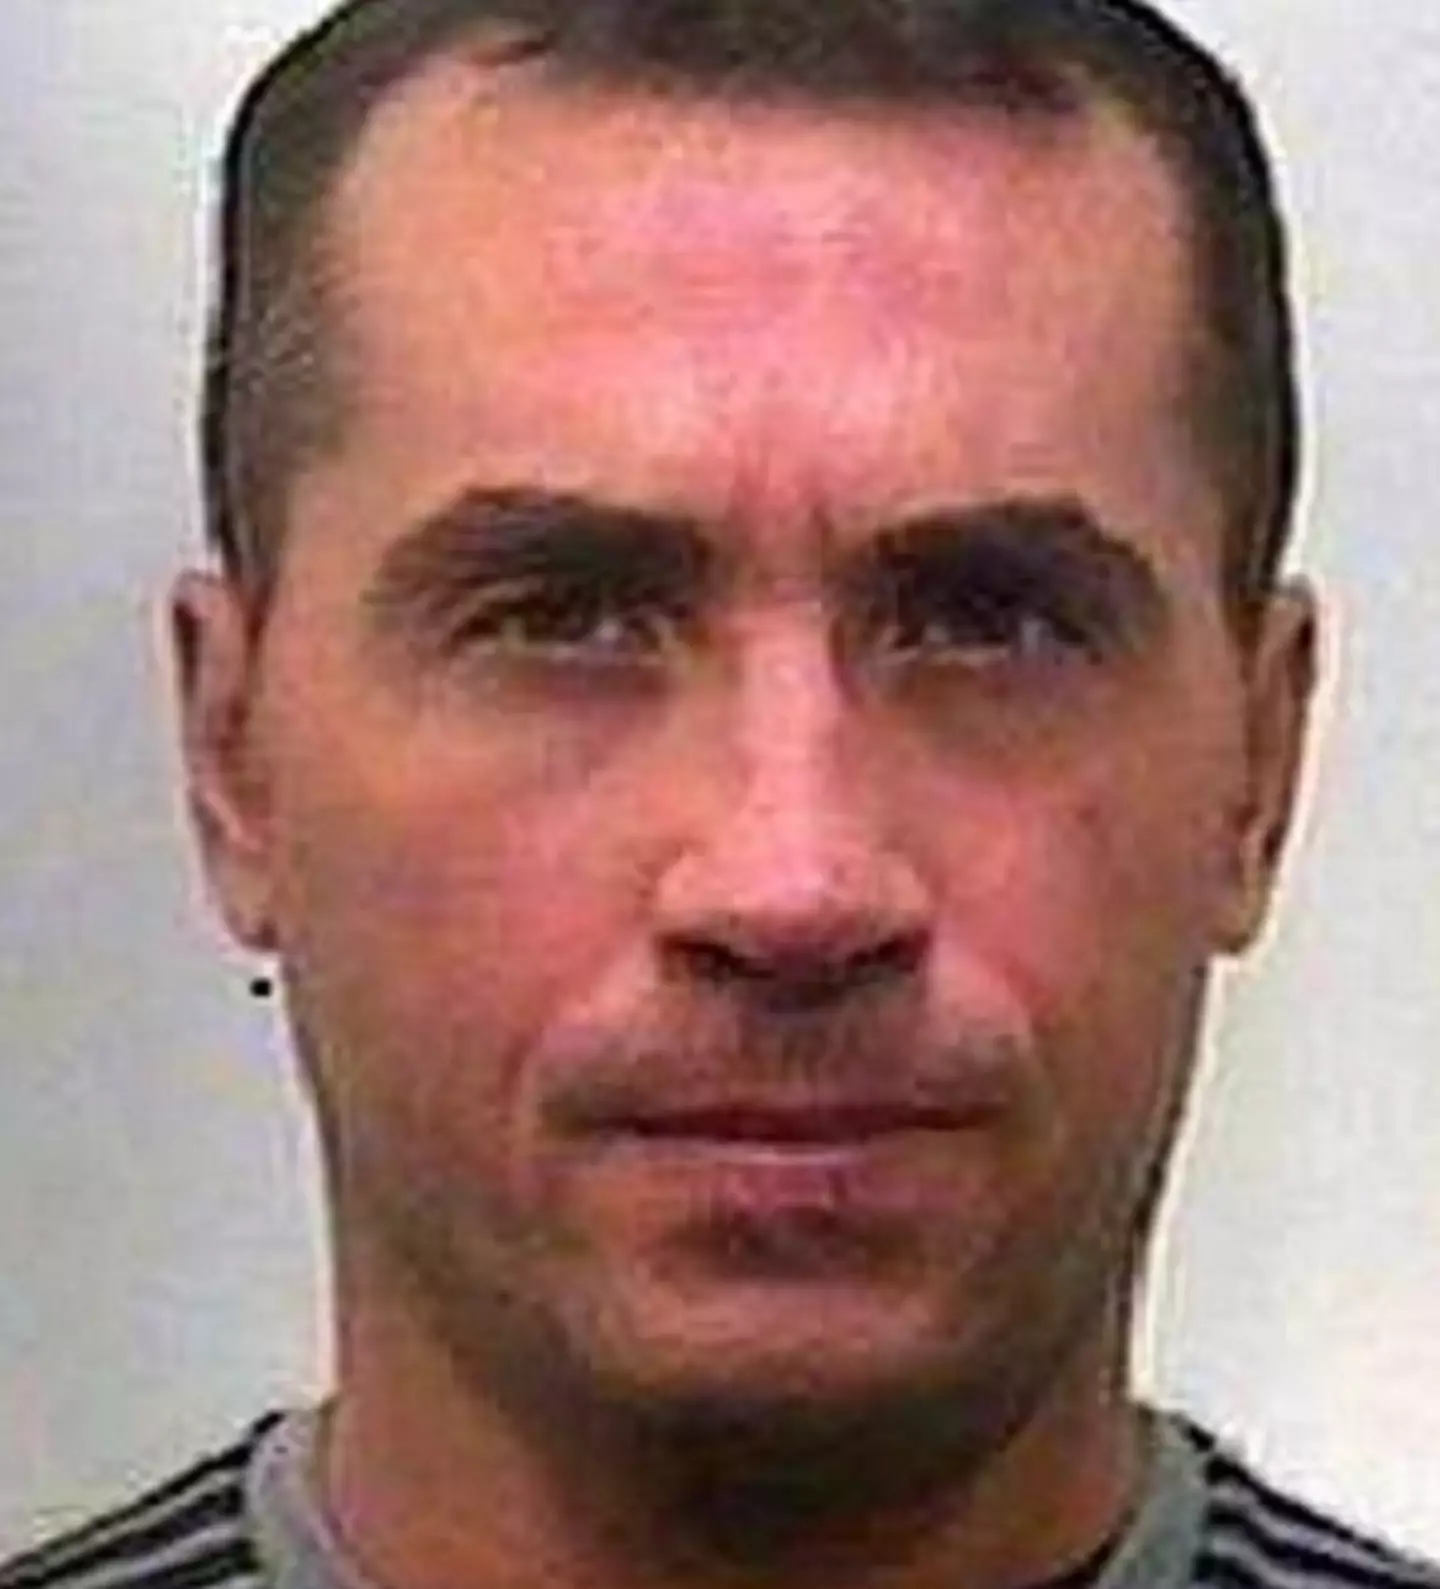 Drug lord Francesco Castriotta was caught after seven years on the run. (Police Handout)